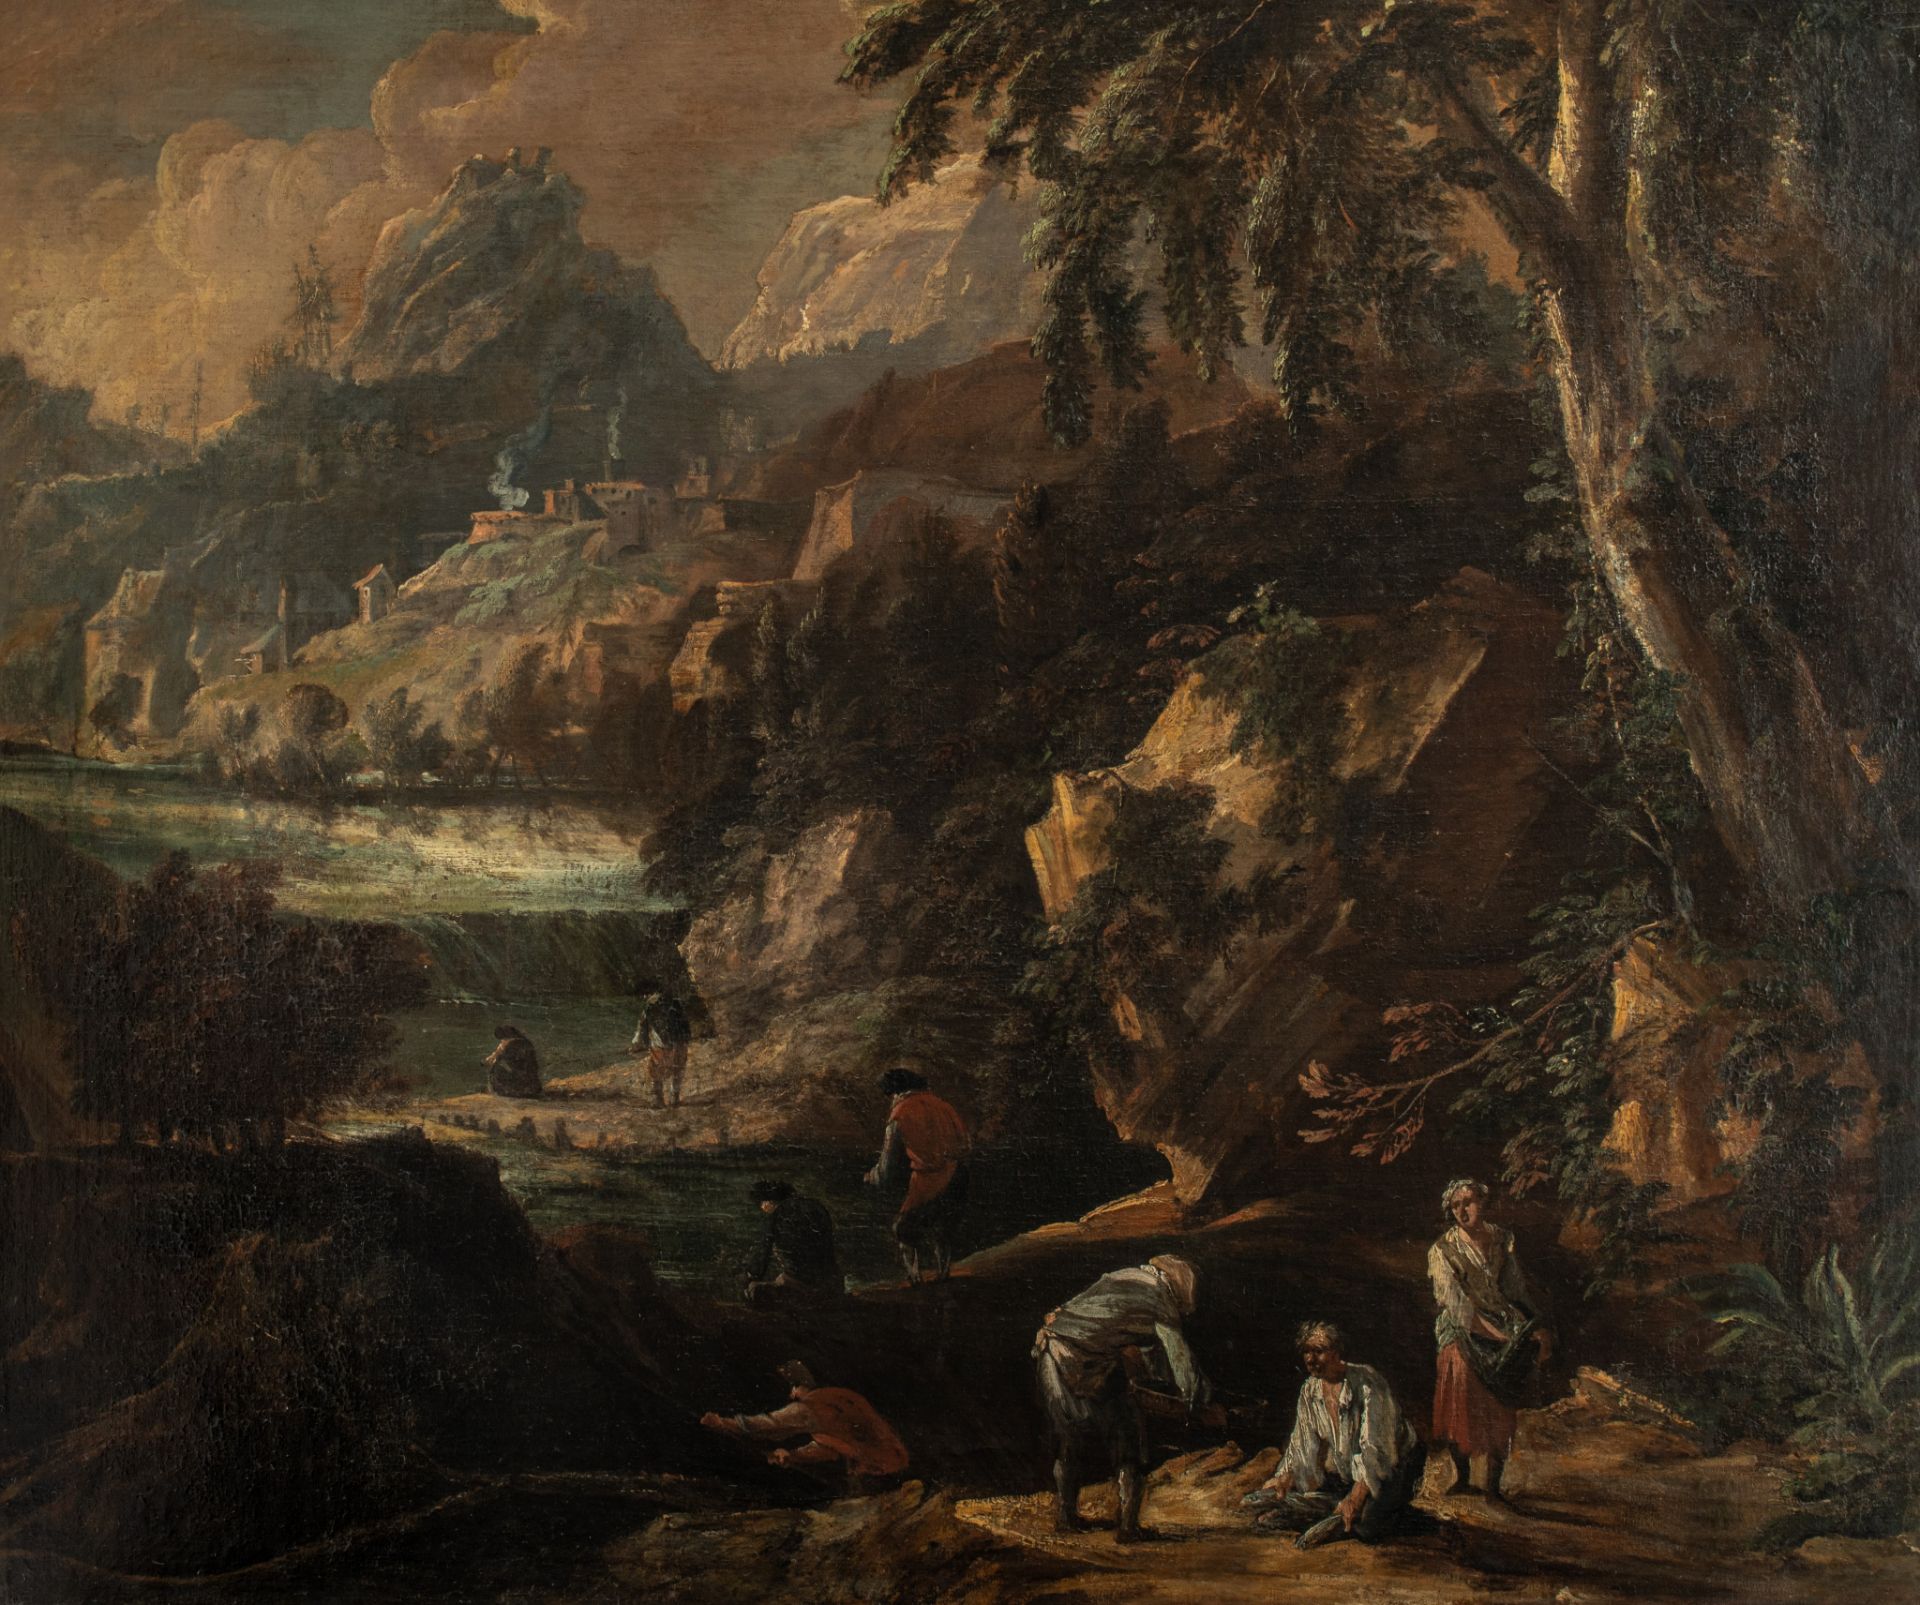 Attributed to Salvator Rosa (1615-1673), the golddiggers, oil on canvas, 120 x 140 cm